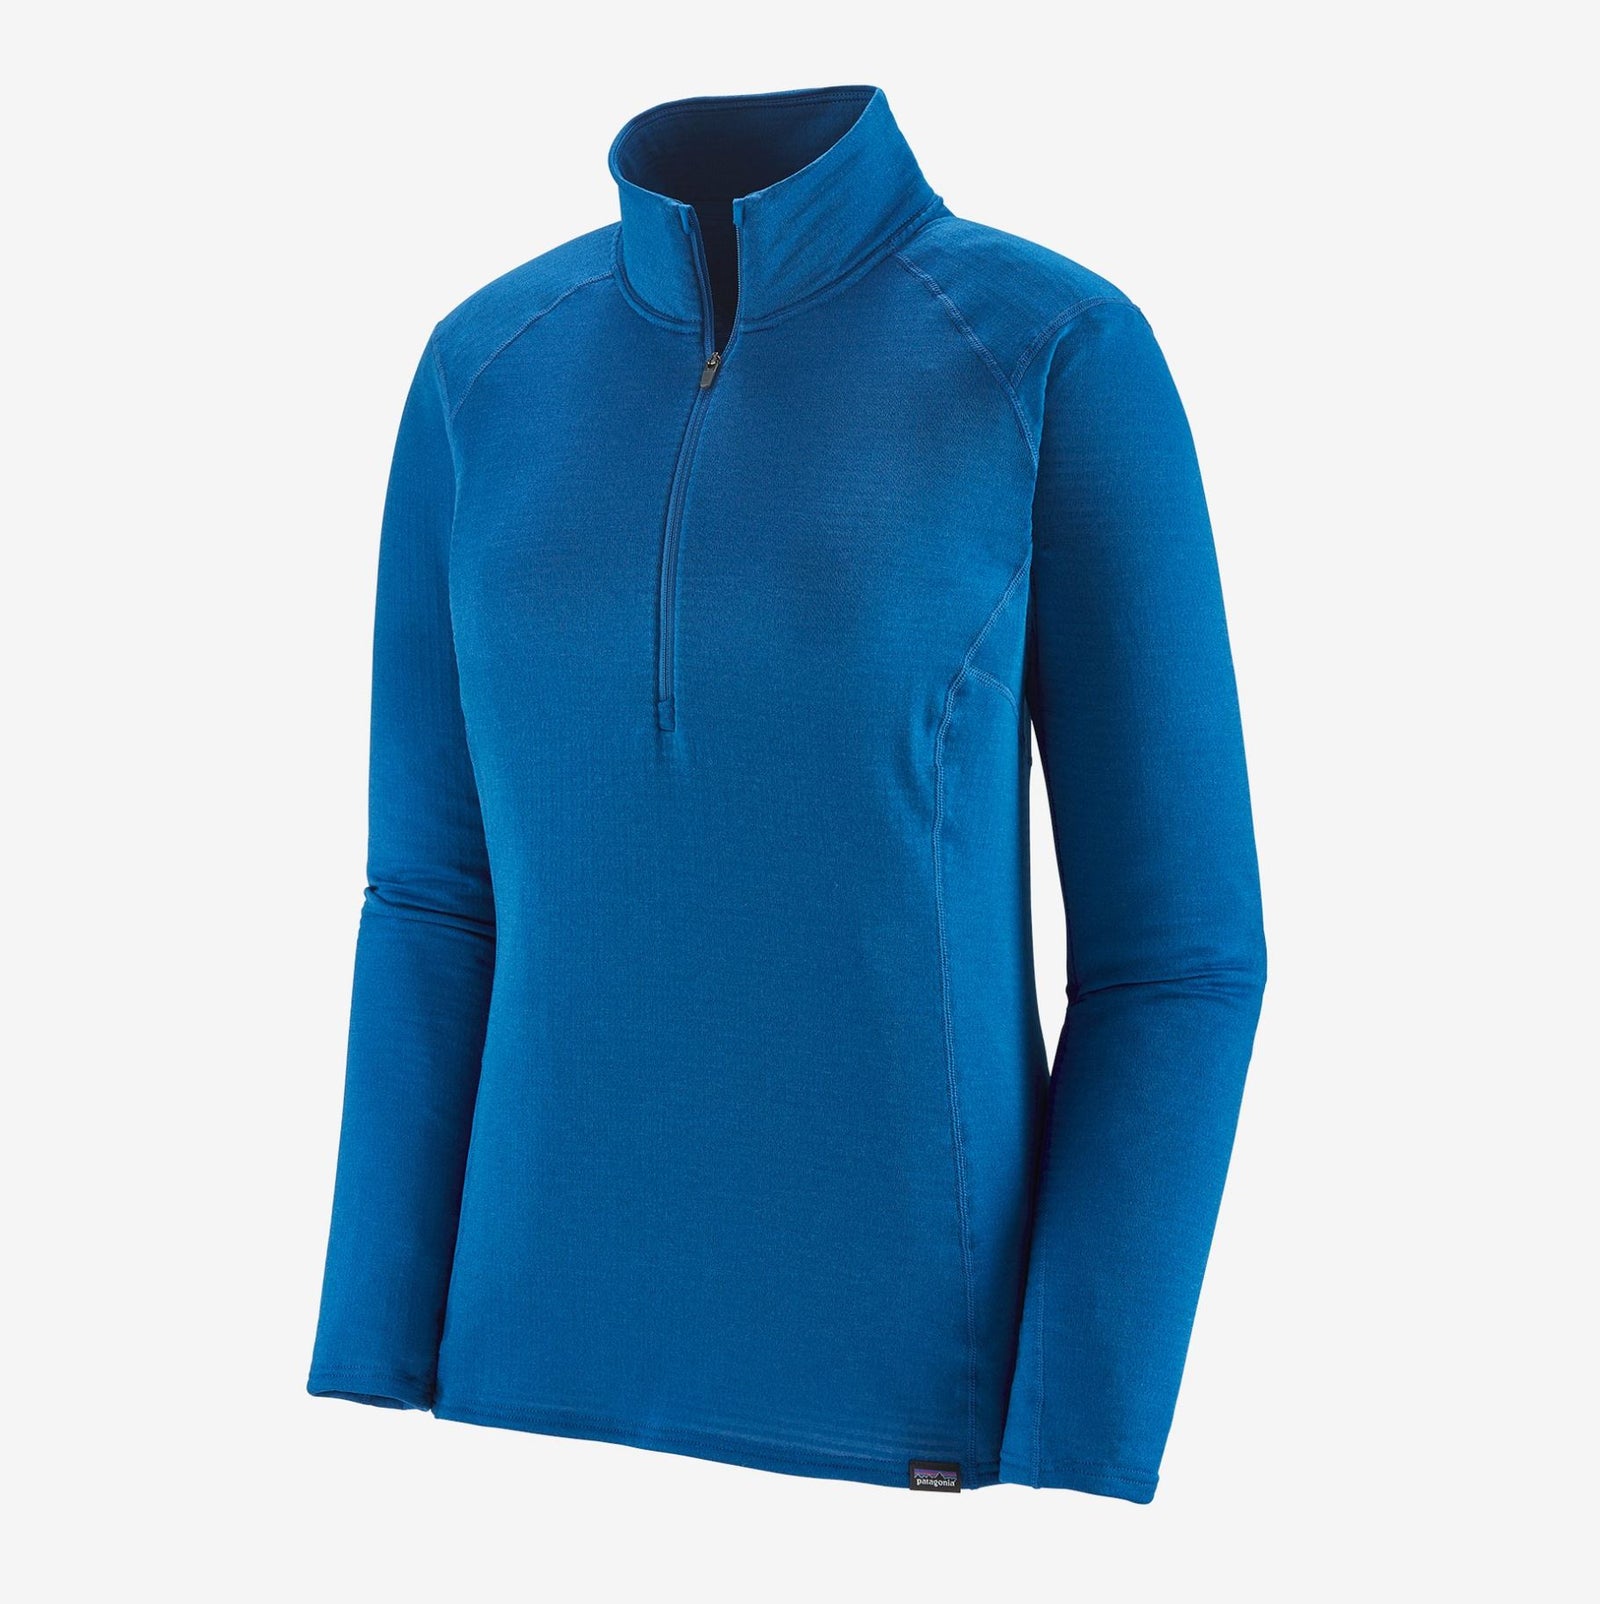 front view of the womens patagonia capilene thermal weight zip neck shirt in the color alpine blue light alpine blue x dye